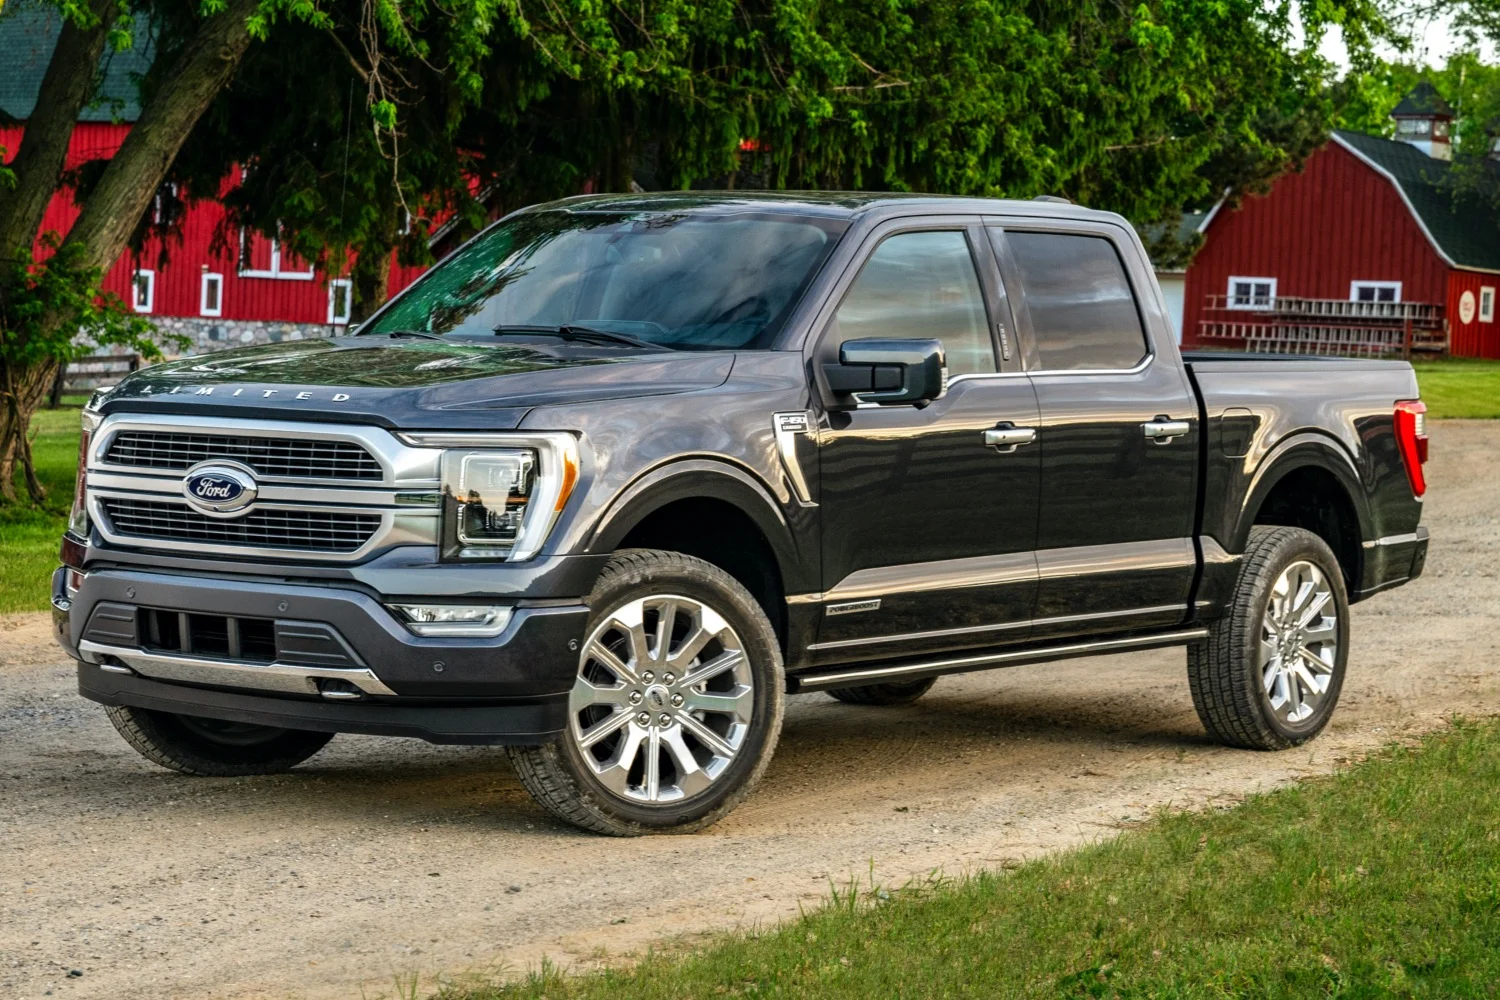 2021 Ford F-150 PowerBoost Is CR's Fastest Accelerating Full-Size